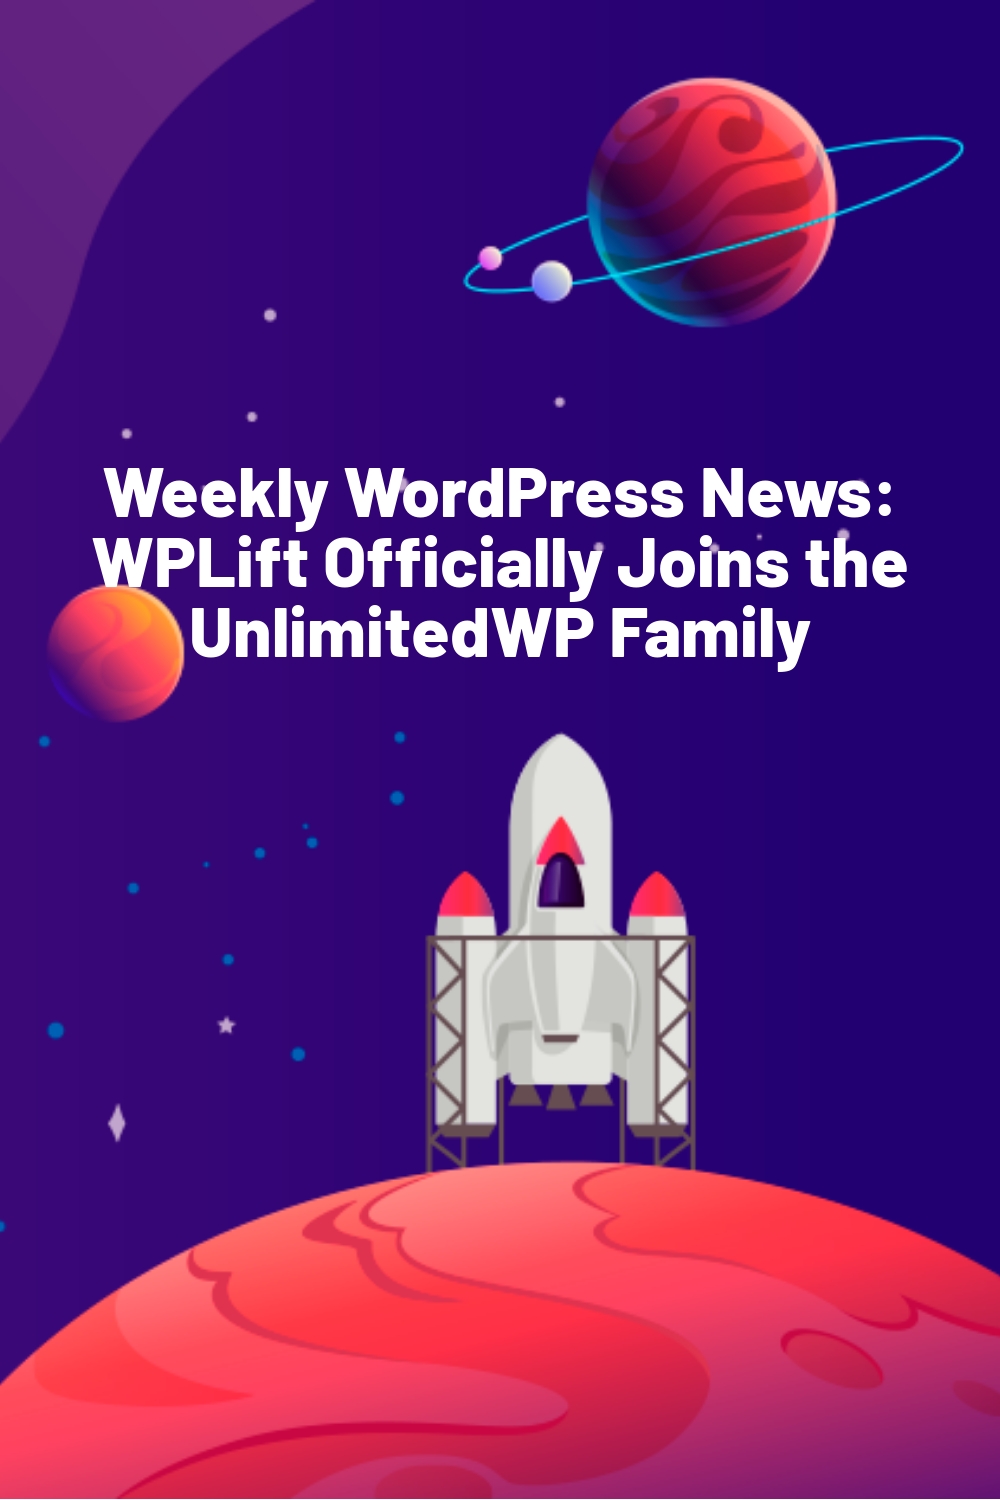 Weekly WordPress News: WPLift Officially Joins the UnlimitedWP Family